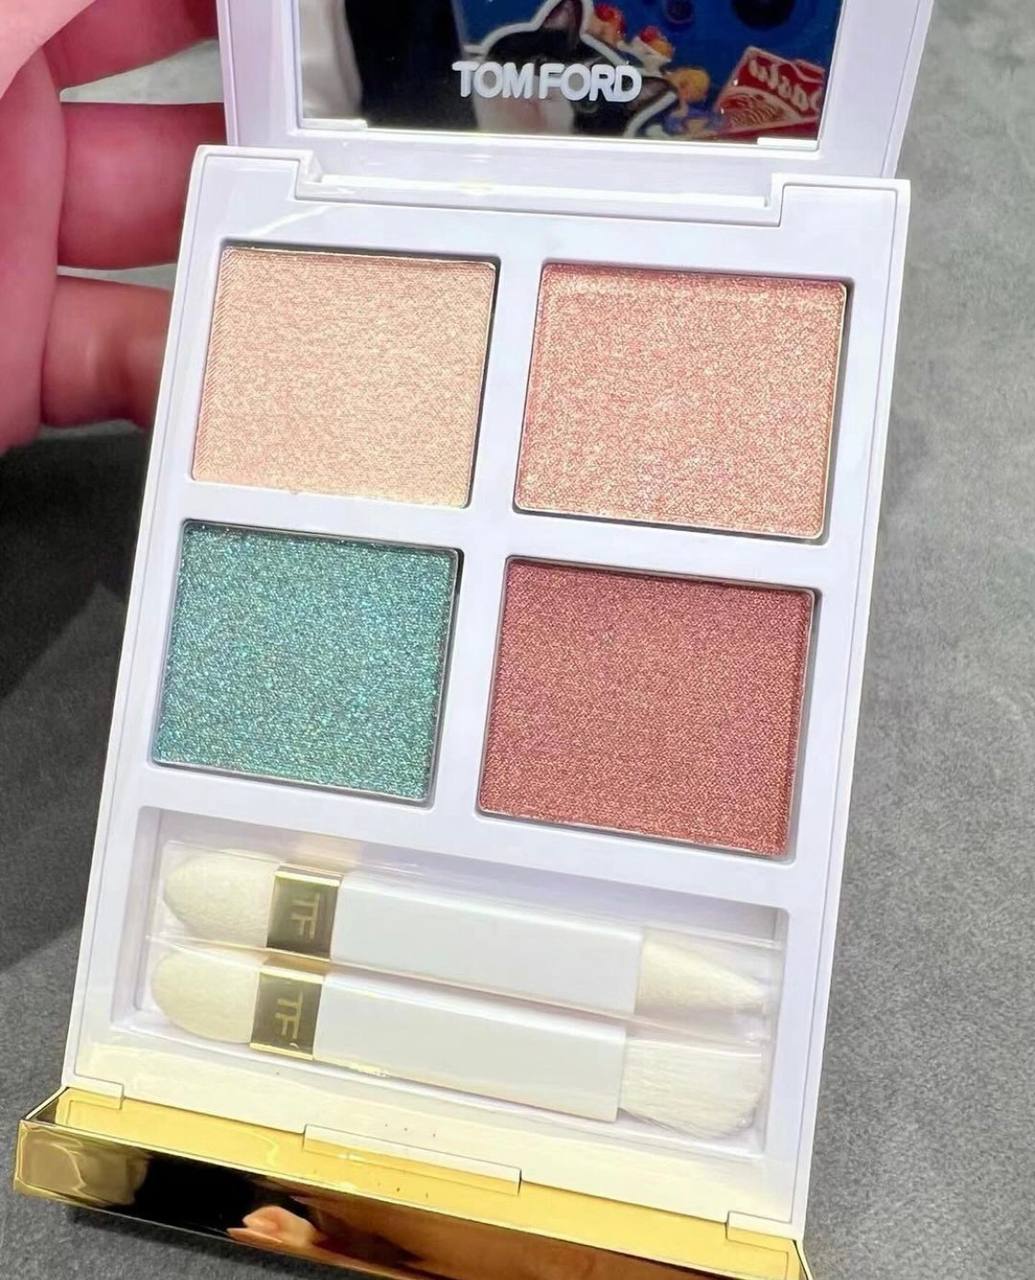 Tom Ford Eye Color Quad in Emerald Dusk – First Look